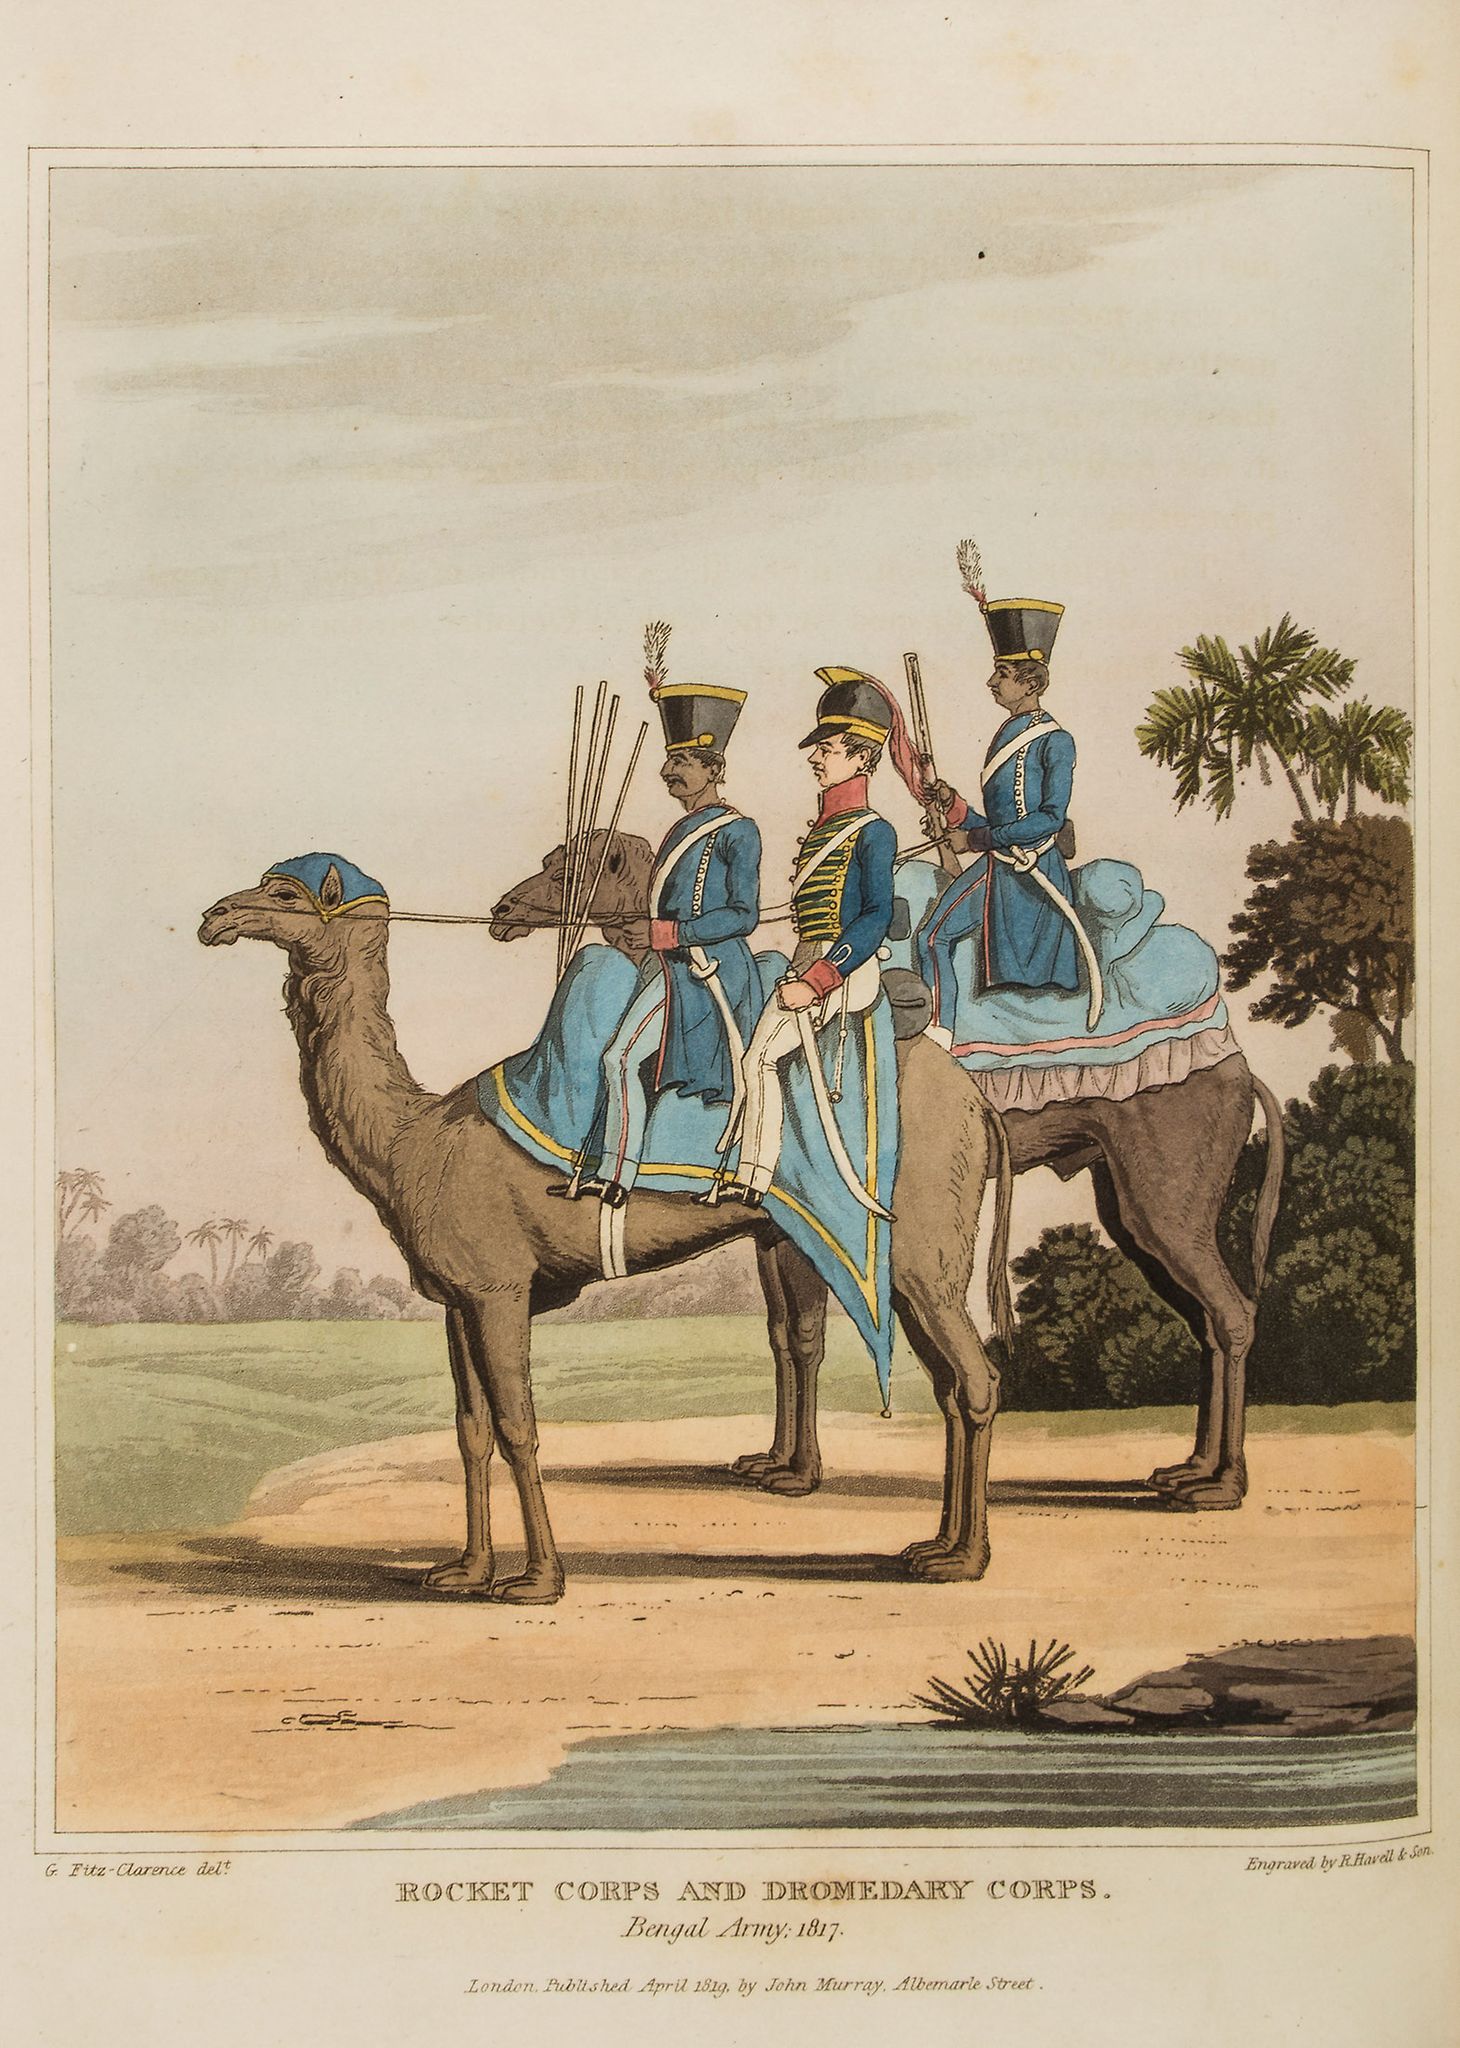 Journal of a Route across India, through Egypt, to England in the…Year 1817  (  Lt. Col.   G. A.)